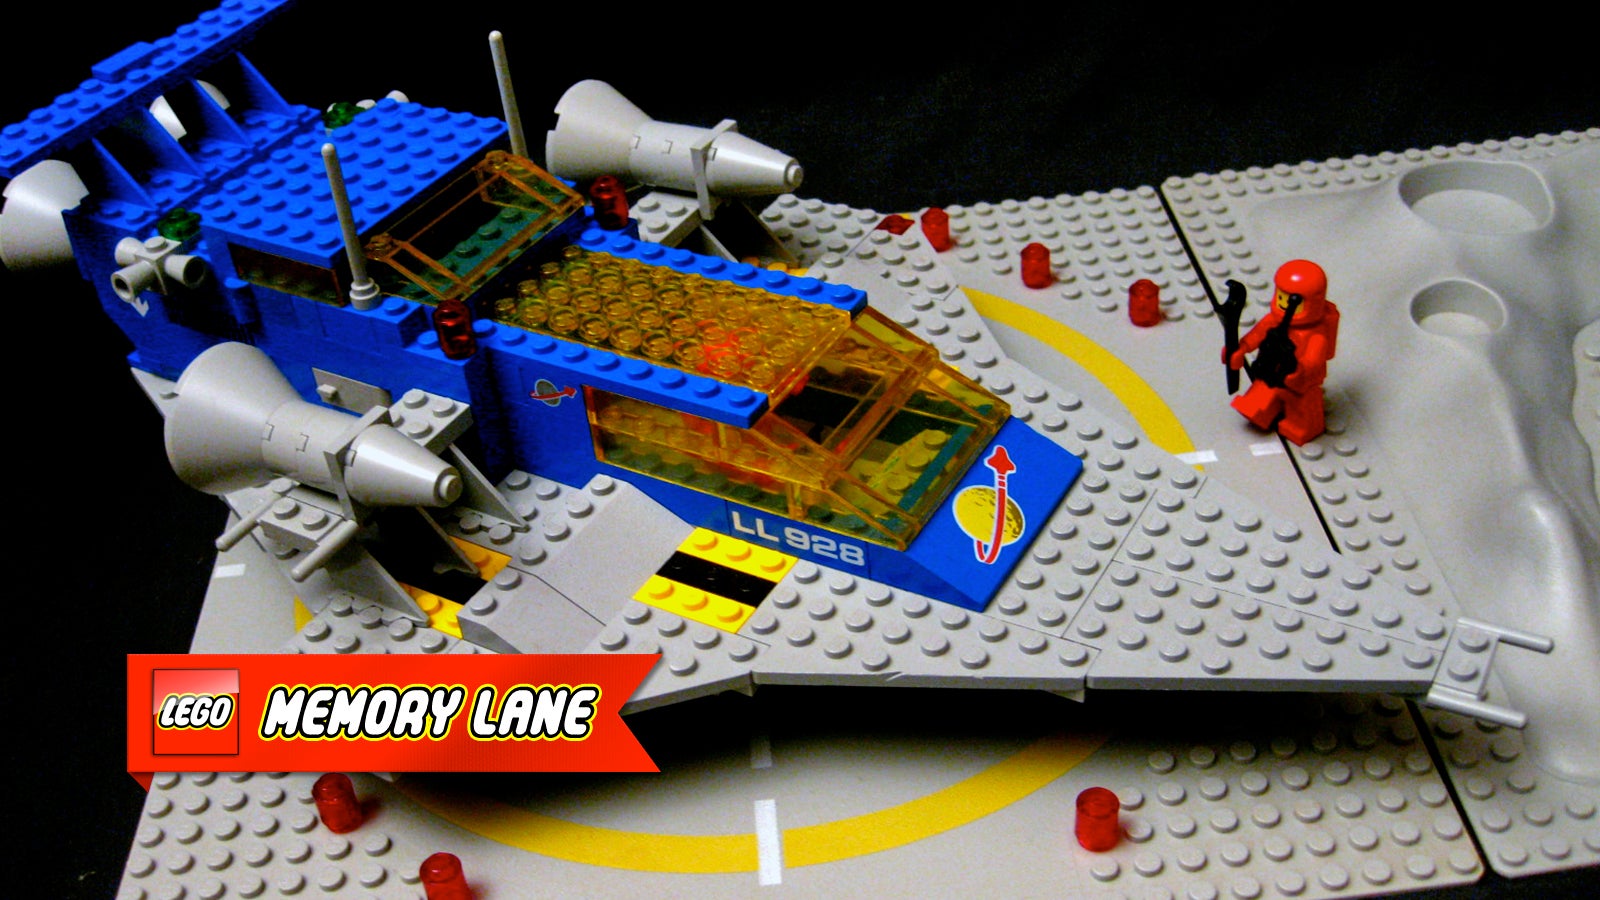 Secret underground vault contains all Lego sets in history